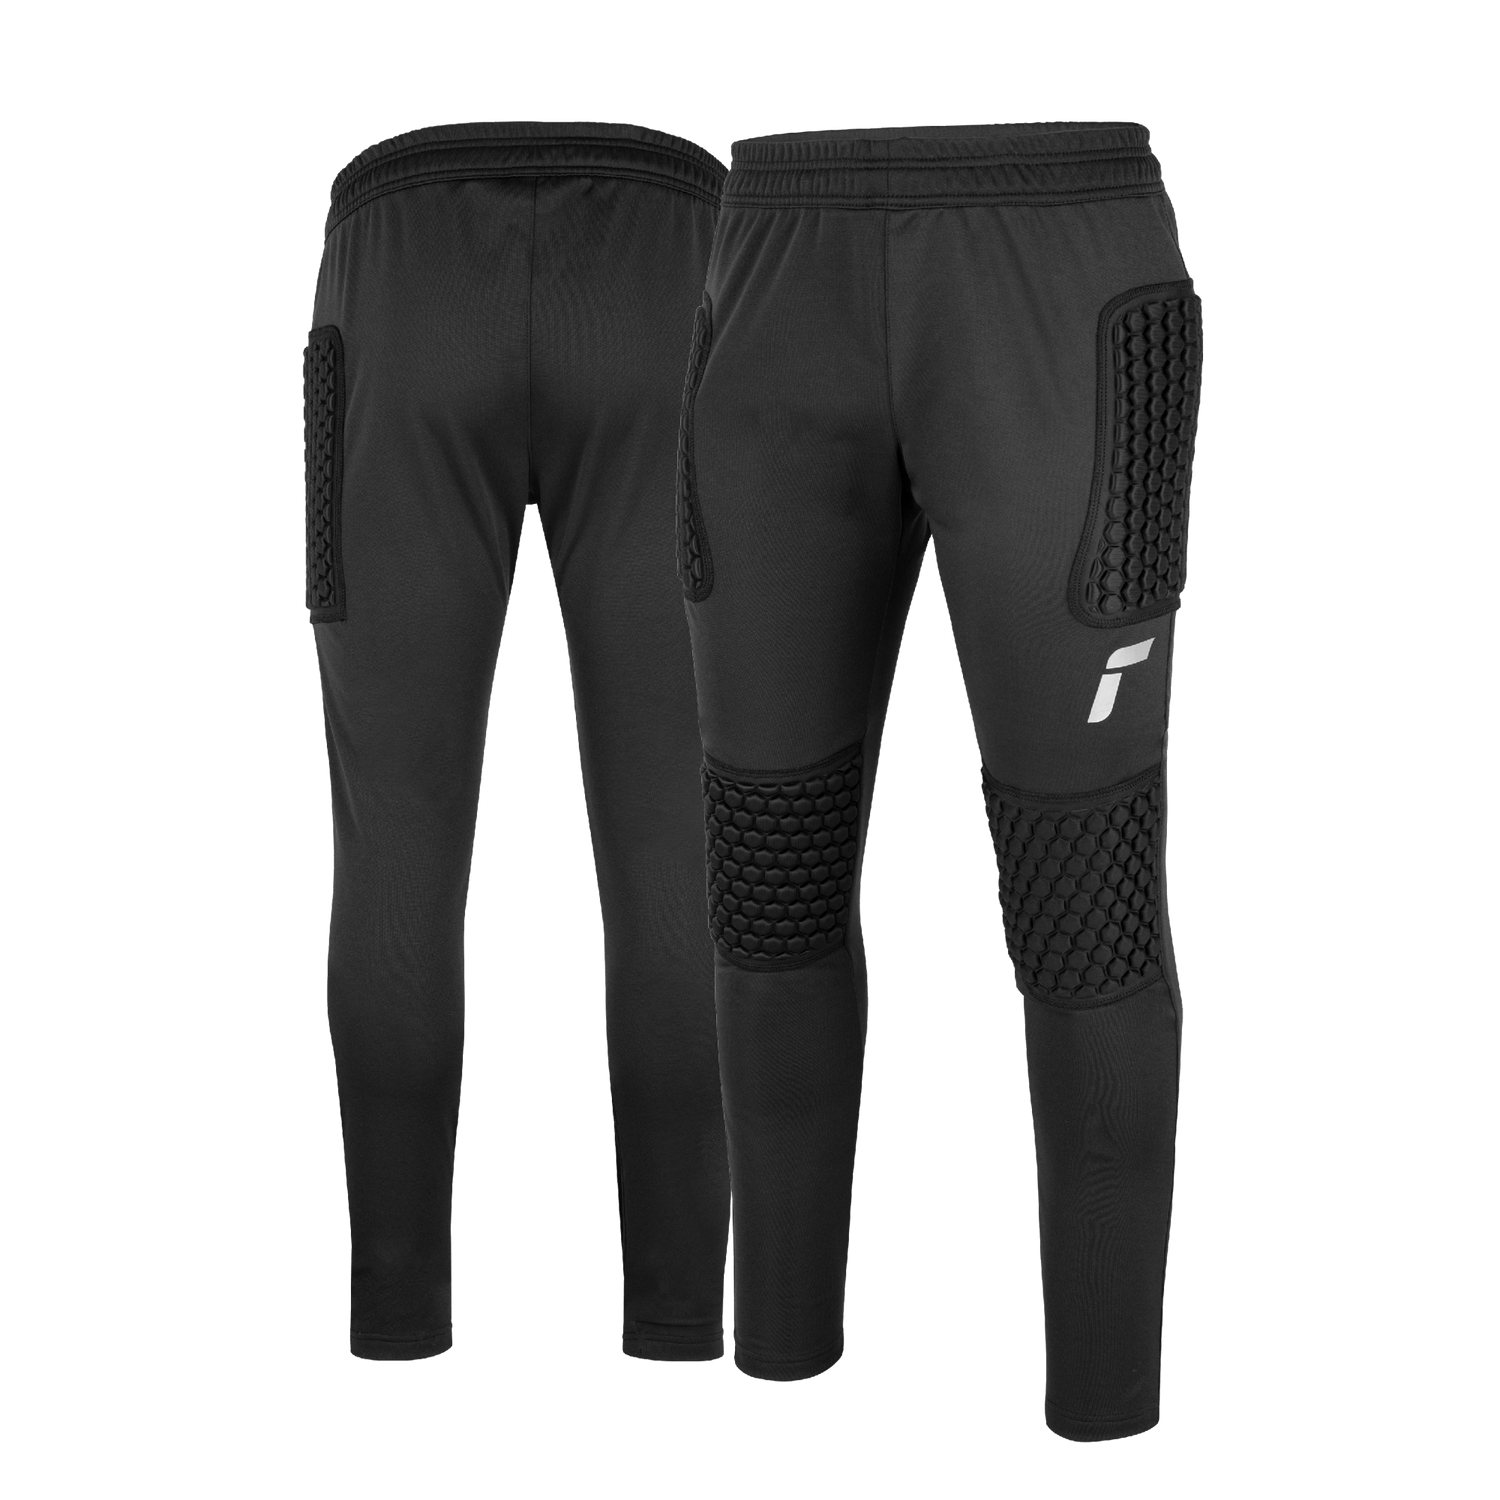 Reusch Contest II GK Pant Advance - Black (Front and Back)